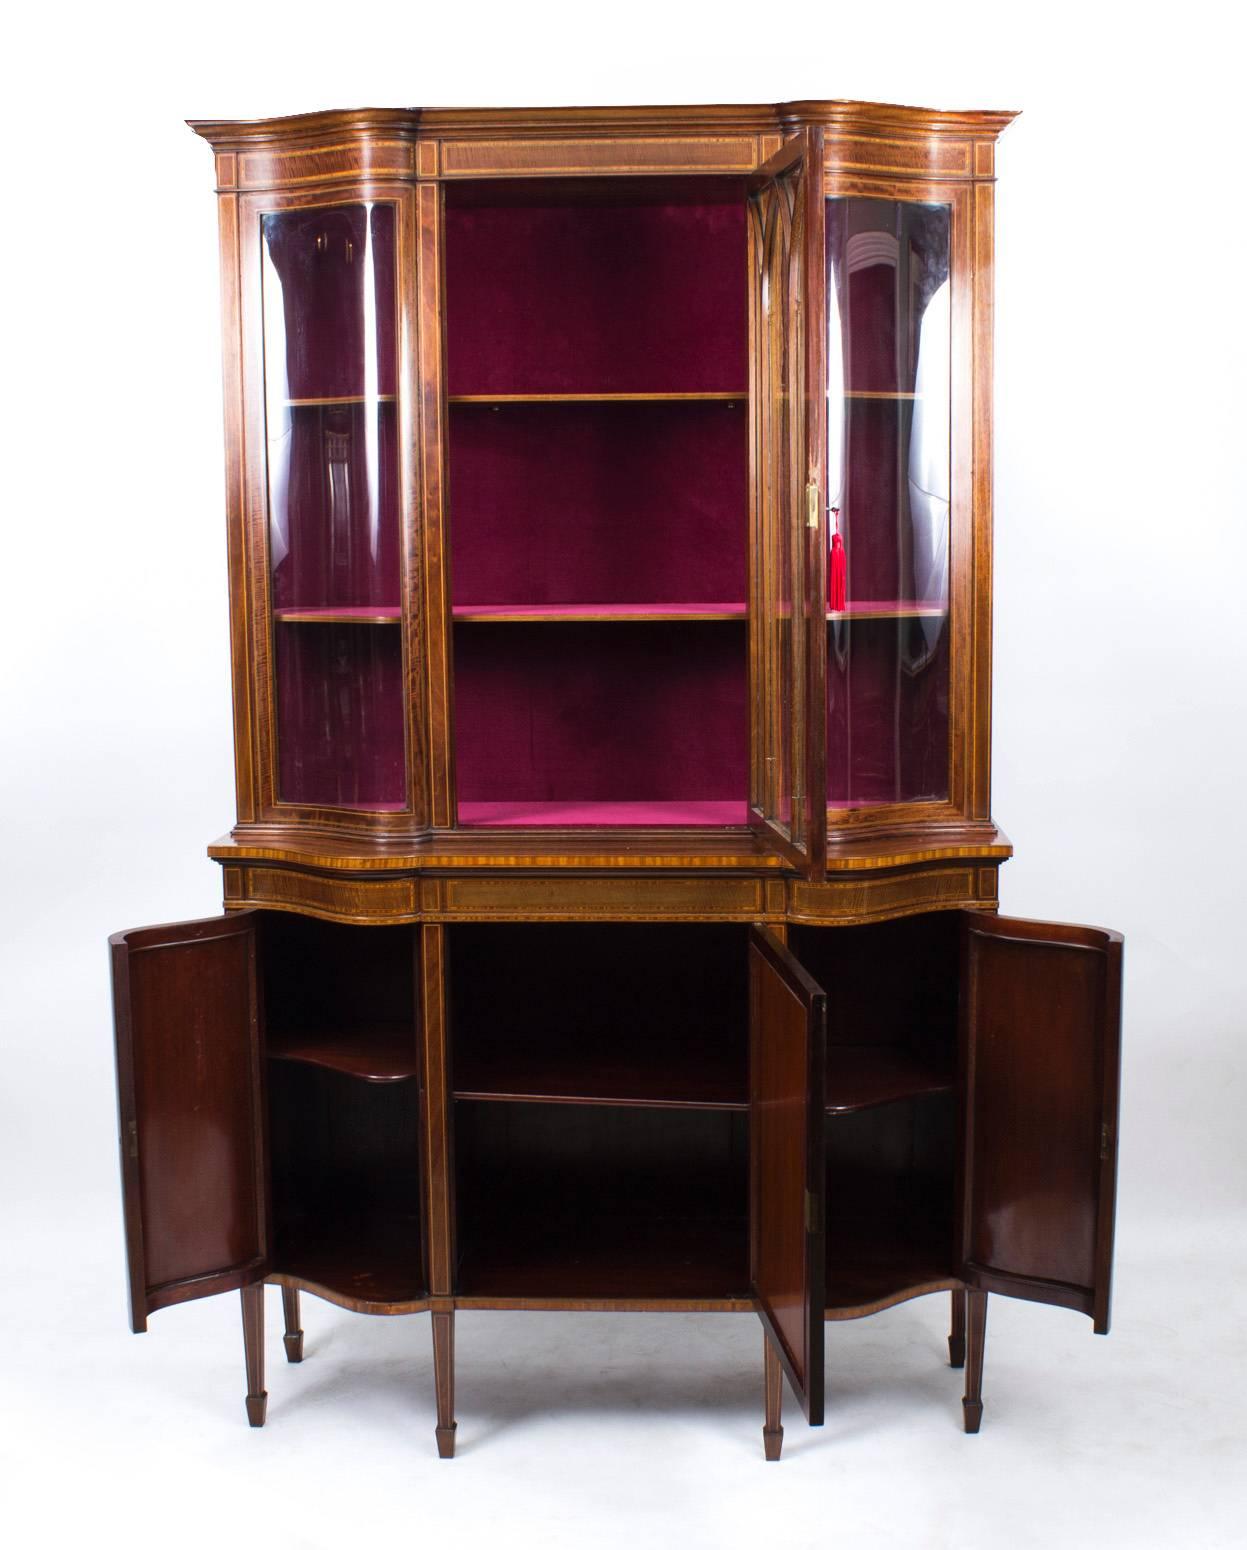 A superb antique English Edwardian mahogany serpentine display cabinet, circa 1900 in date, of the very highest quality, with inlaid decoration, typical of Edwards and Roberts furniture.

The top part has a large central door with astragal glazing